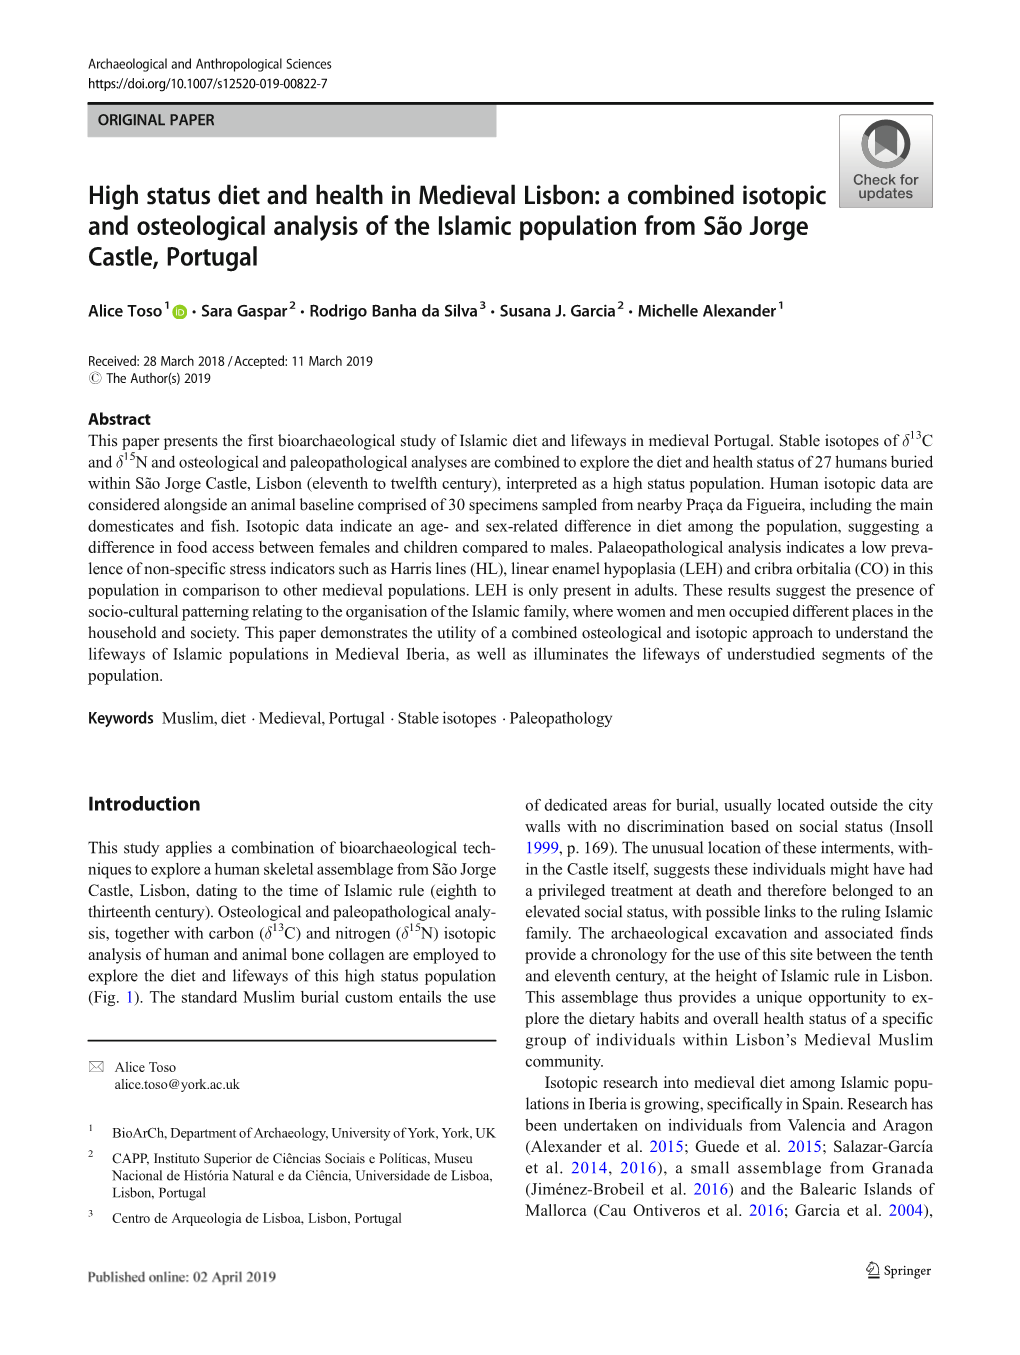 High Status Diet and Health in Medieval Lisbon: a Combined Isotopic and Osteological Analysis of the Islamic Population from São Jorge Castle, Portugal